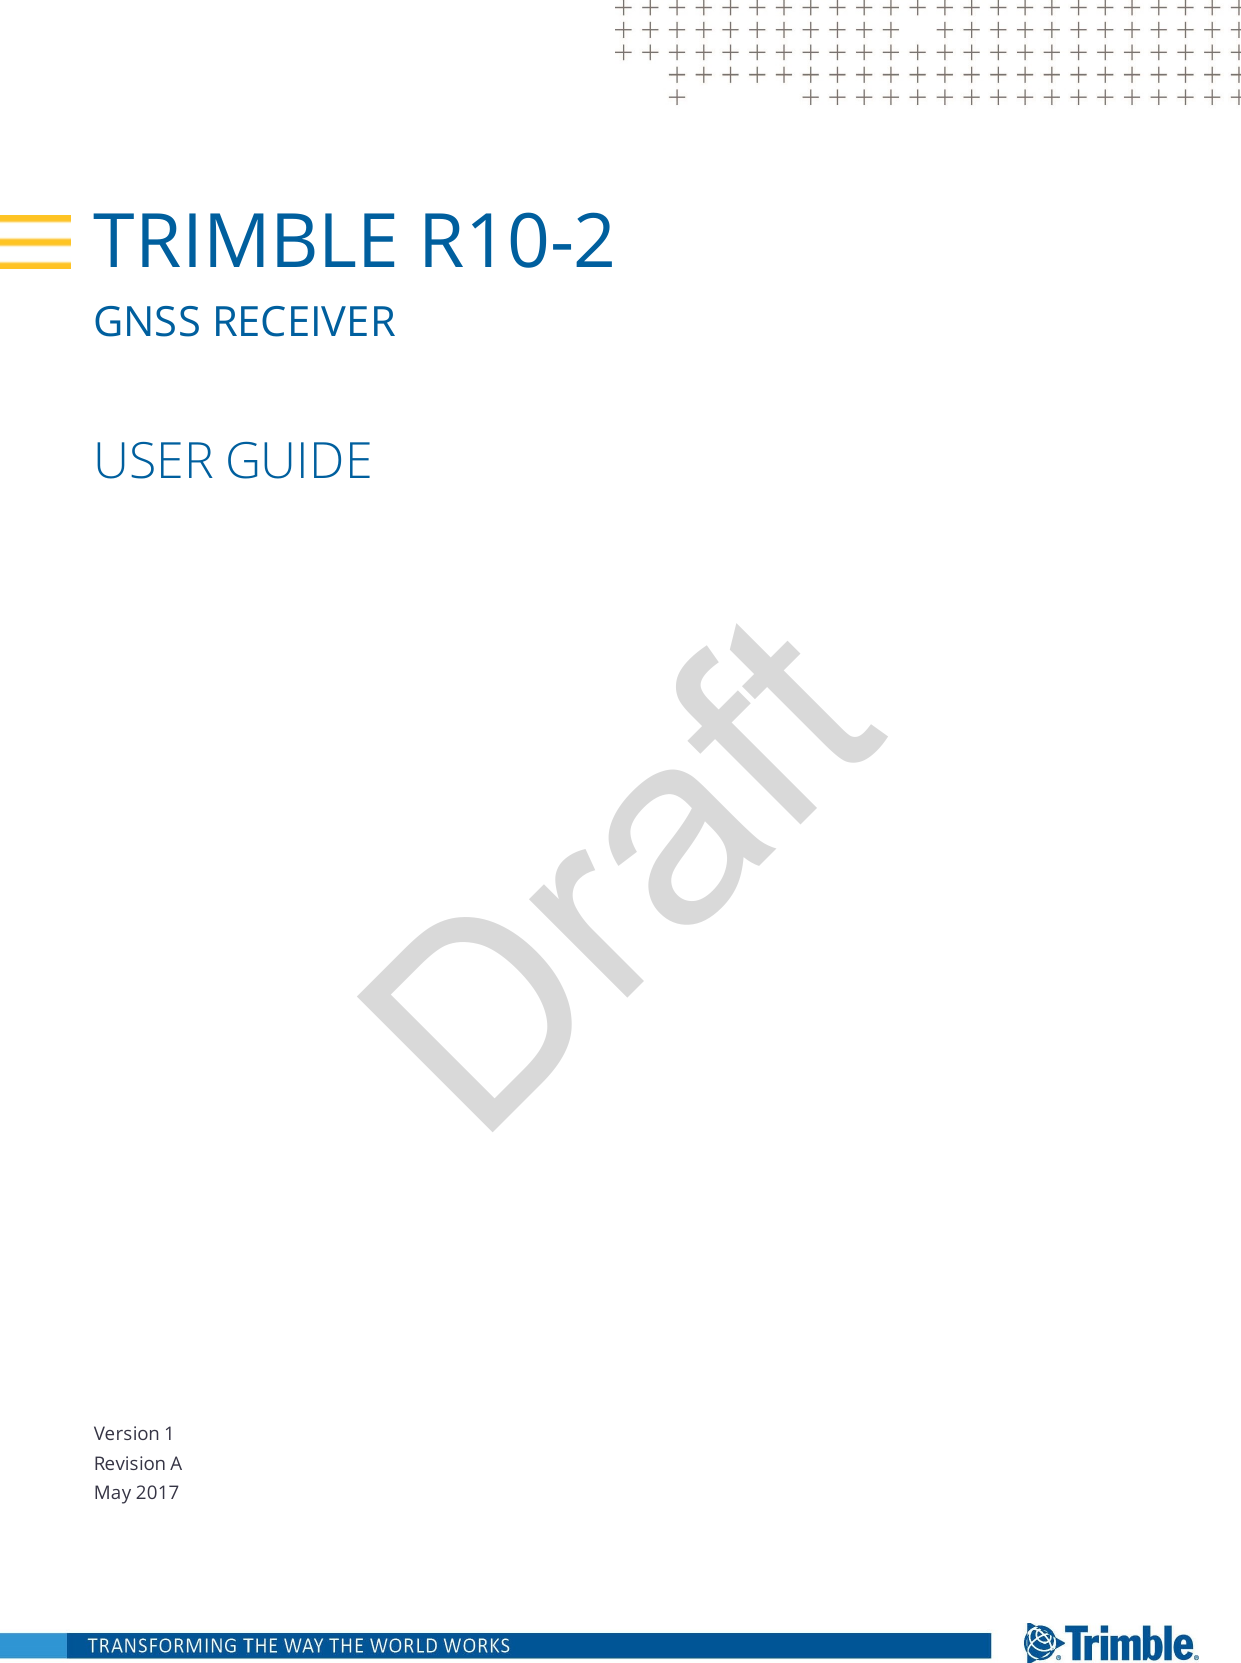 DraftVersion 1Revision AMay 2017TRIMBLE R10-2GNSS RECEIVERUSER GUIDE